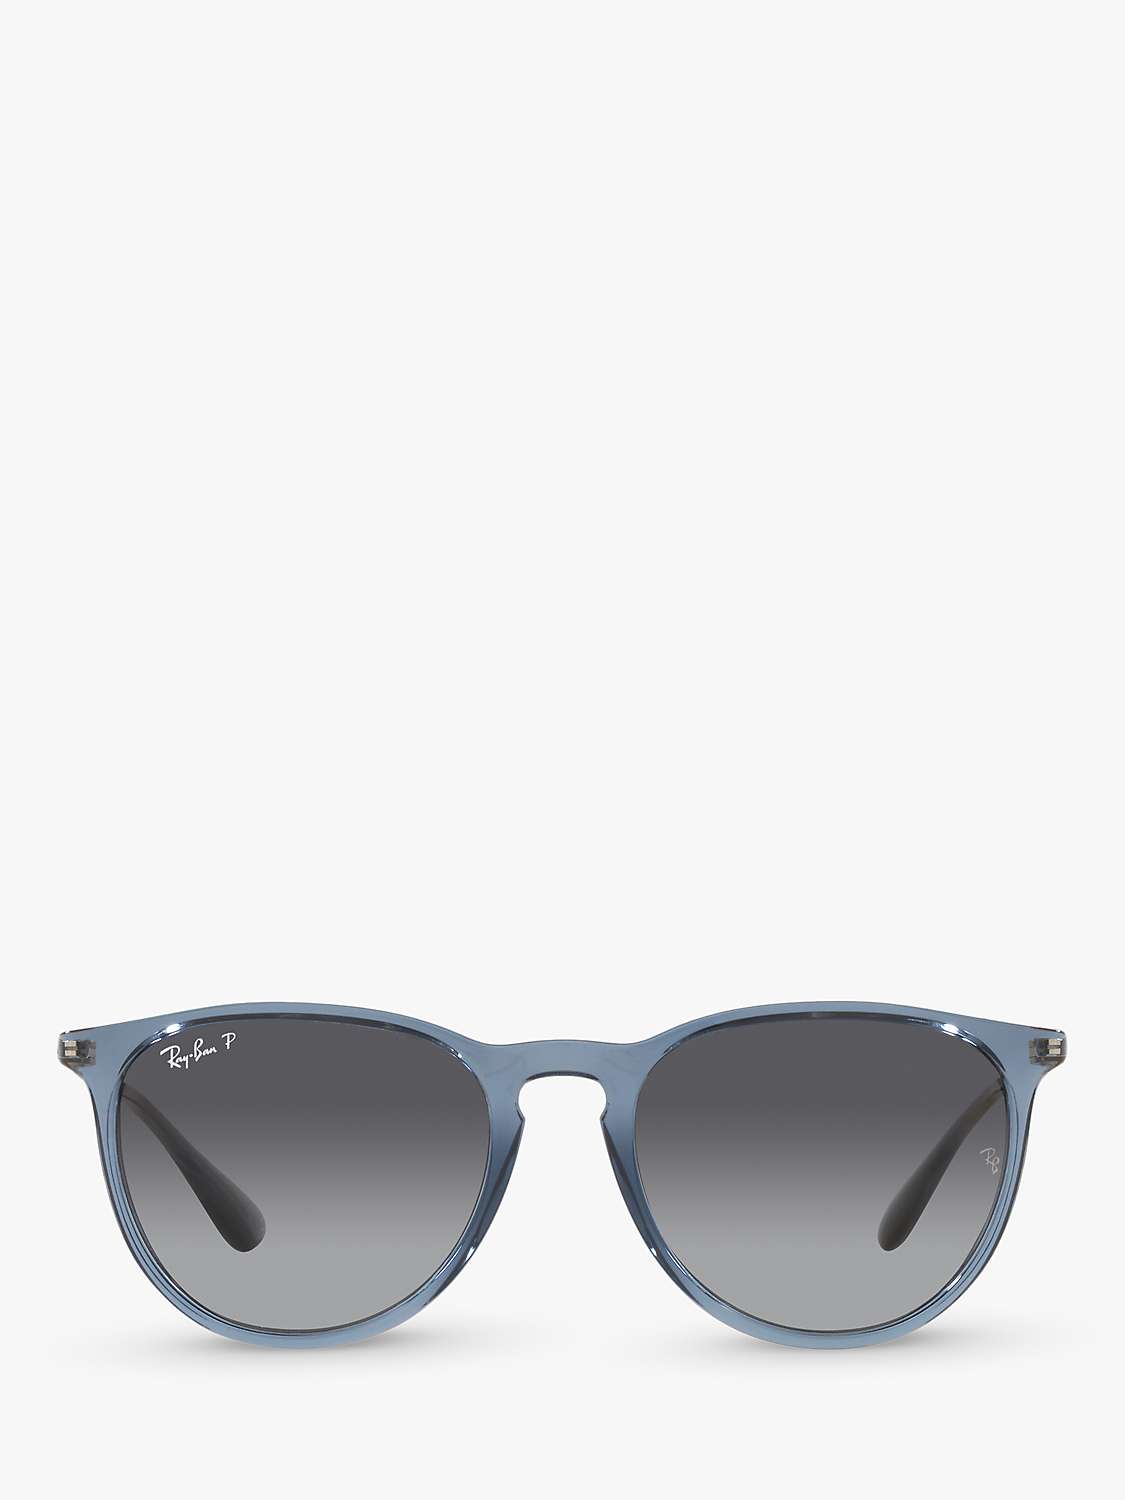 Buy Ray-Ban RB4171 Women's Erika Polarised Oval Sunglasses Online at johnlewis.com